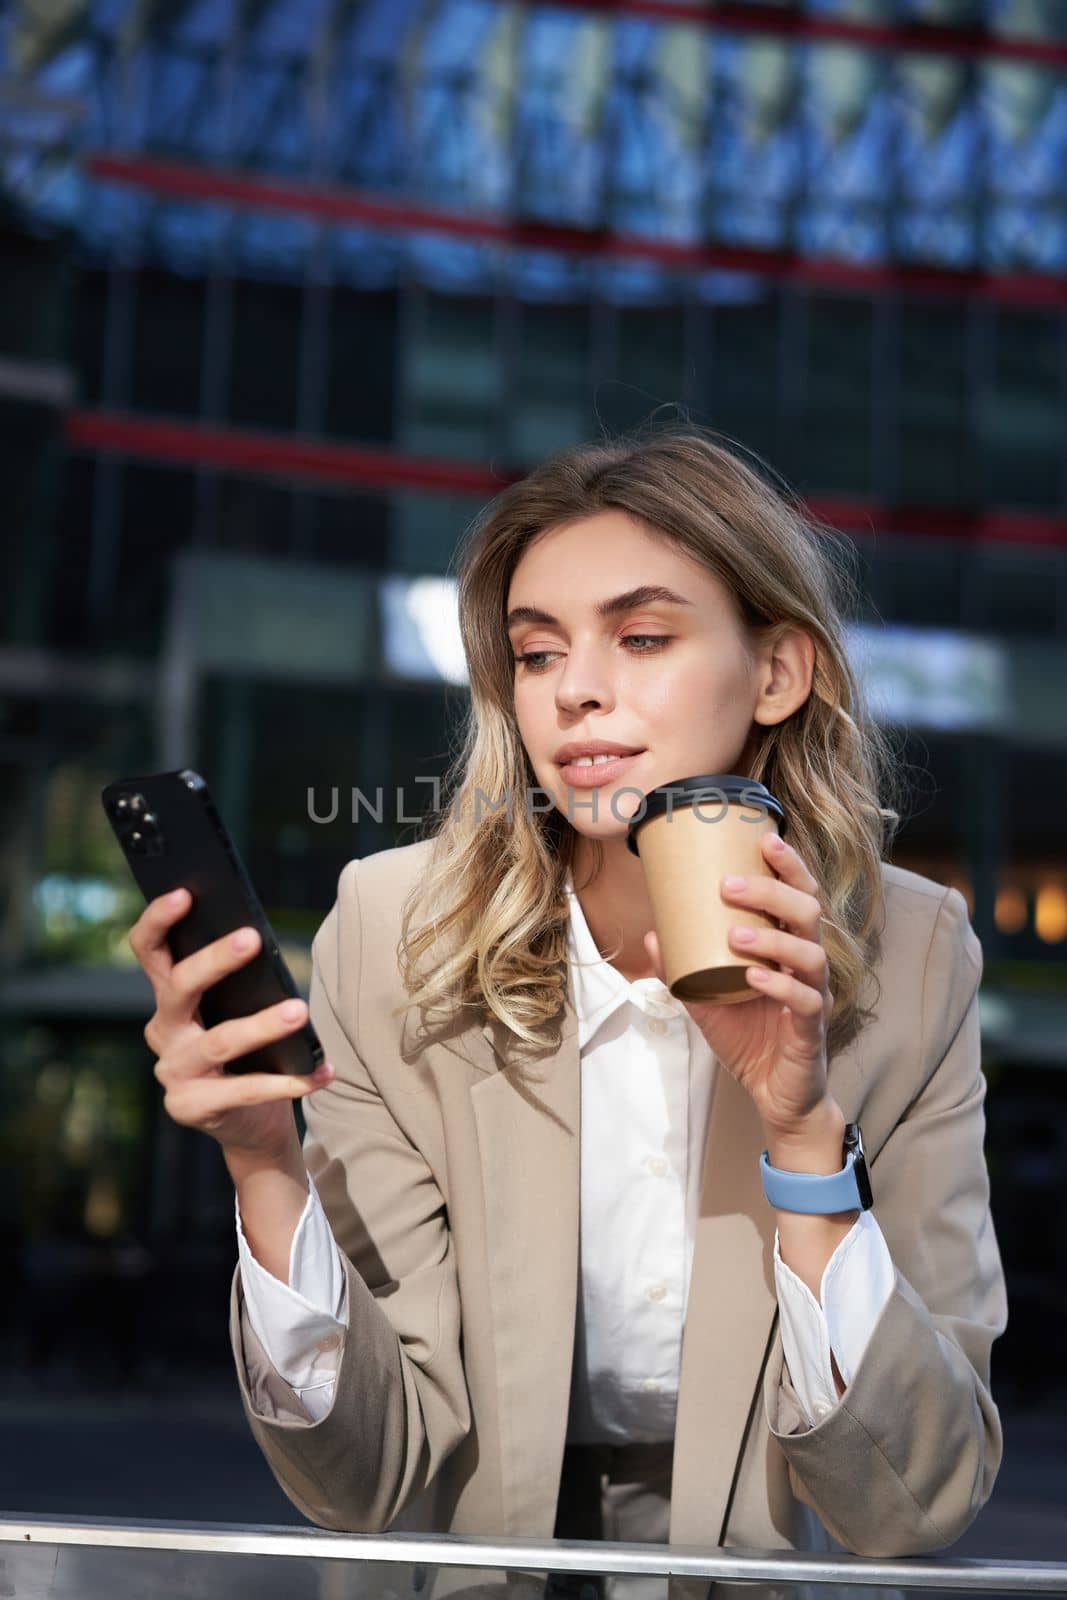 Vertical shot of businesswoman drinks coffee, looks at mobile phone app. Corporate woman on her lunch break, using smartphone.